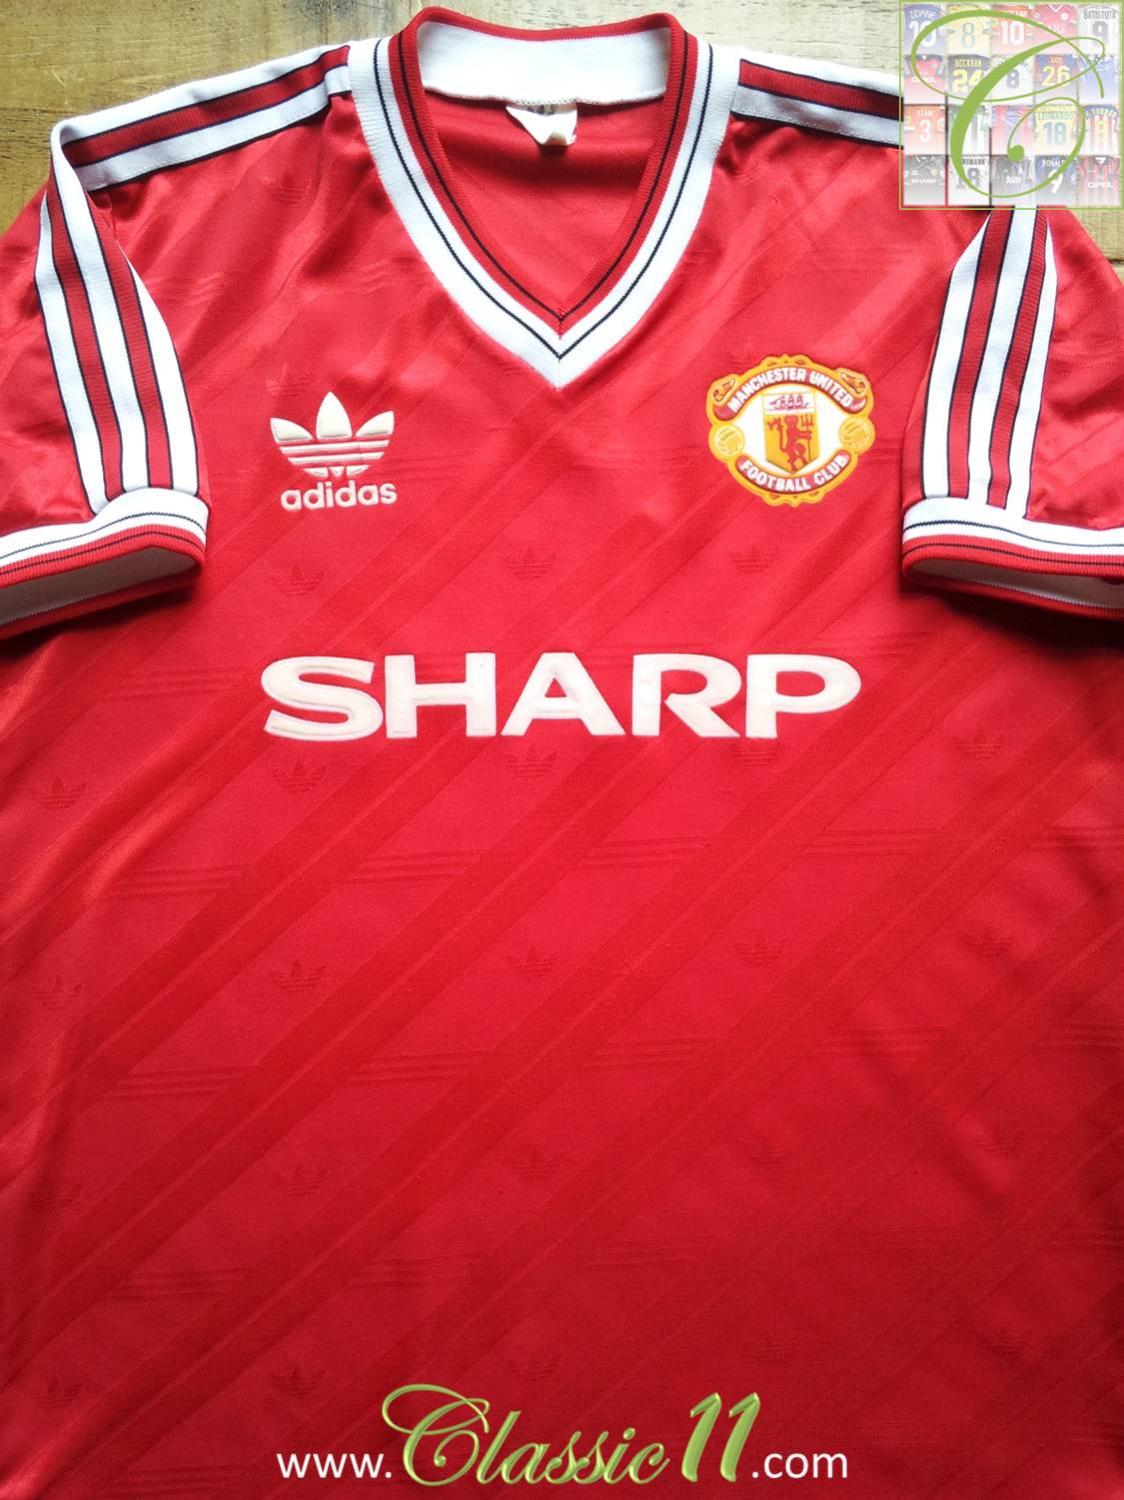 Manchester United Home football shirt 1986 - 1988. Sponsored by Sharp1124 x 1500